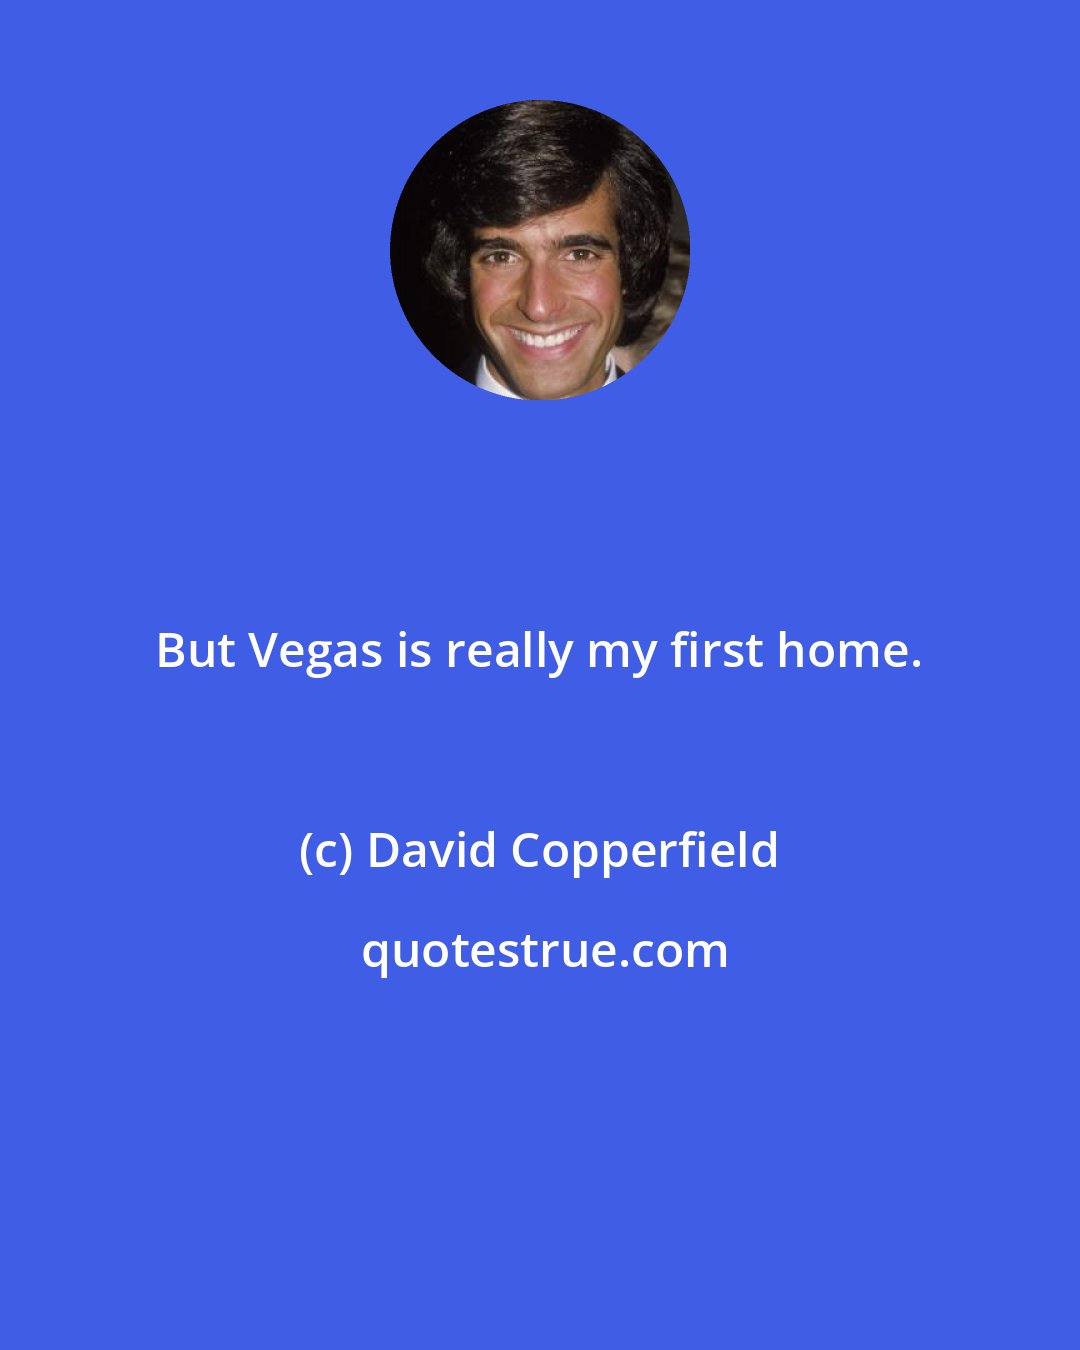 David Copperfield: But Vegas is really my first home.